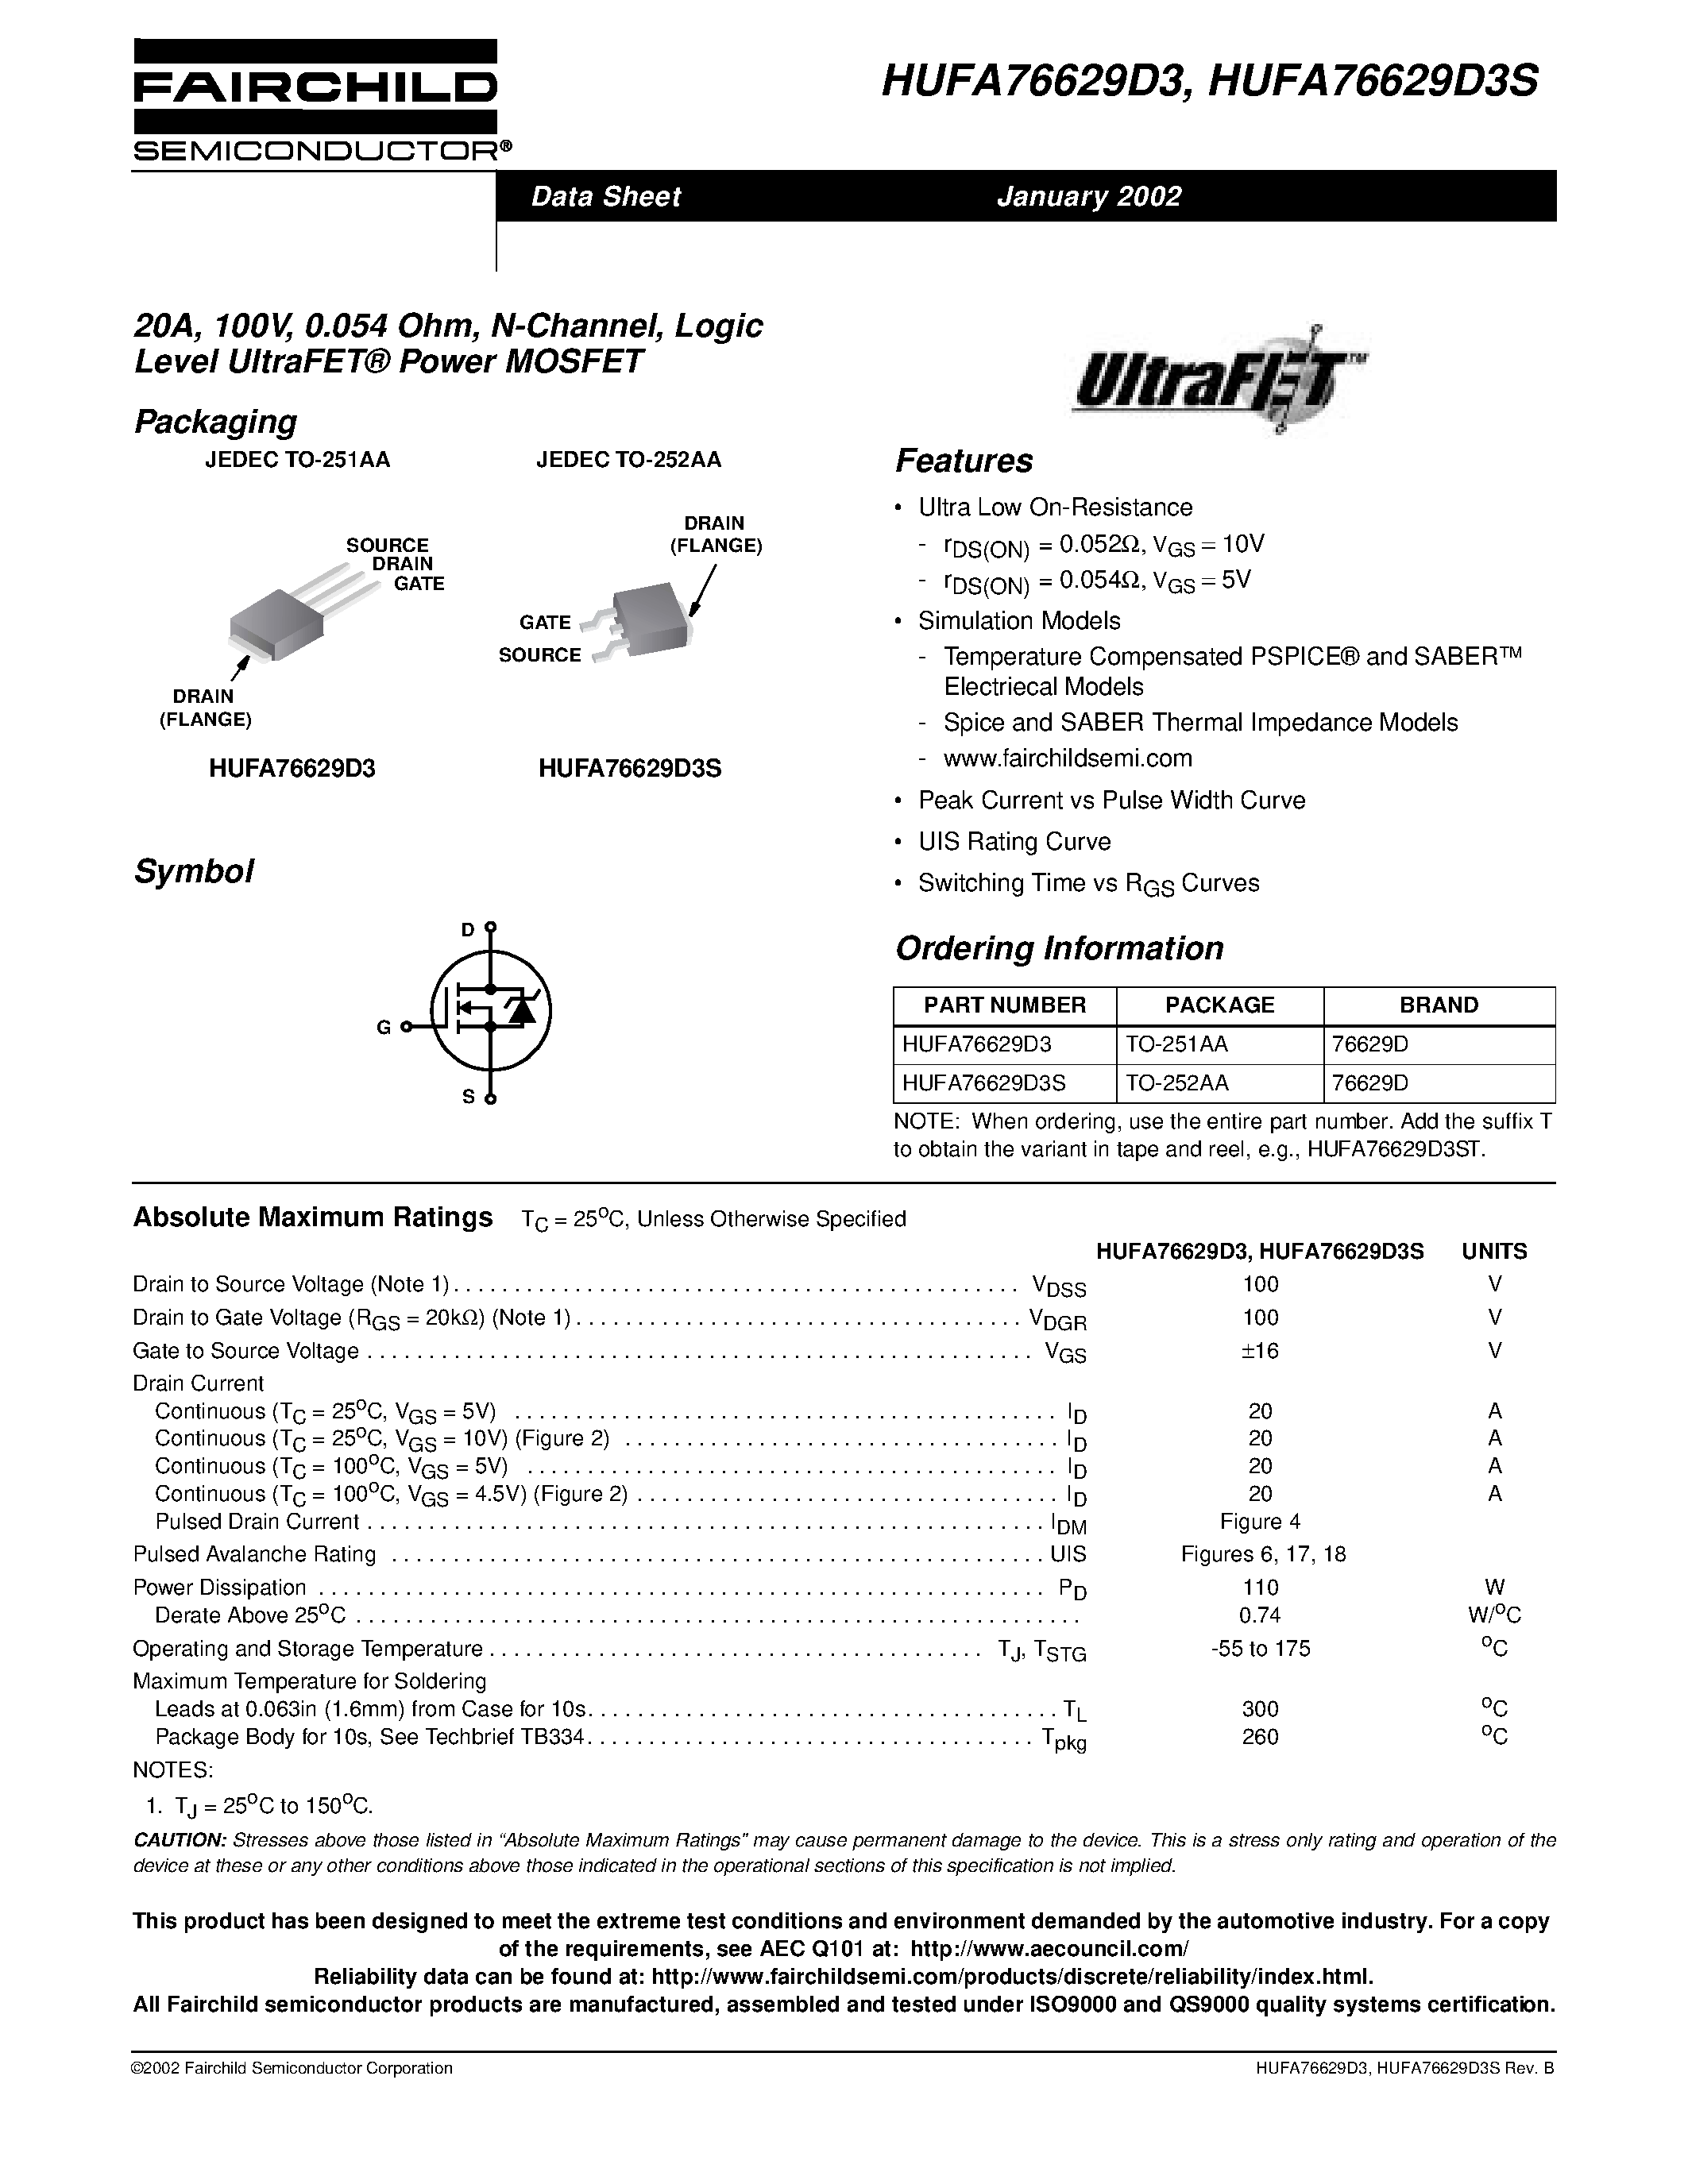 Datasheet HUFA76629D3 - 20A/ 100V/ 0.054 Ohm/ N-Channel/ Logic Level UltraFET Power MOSFET page 1